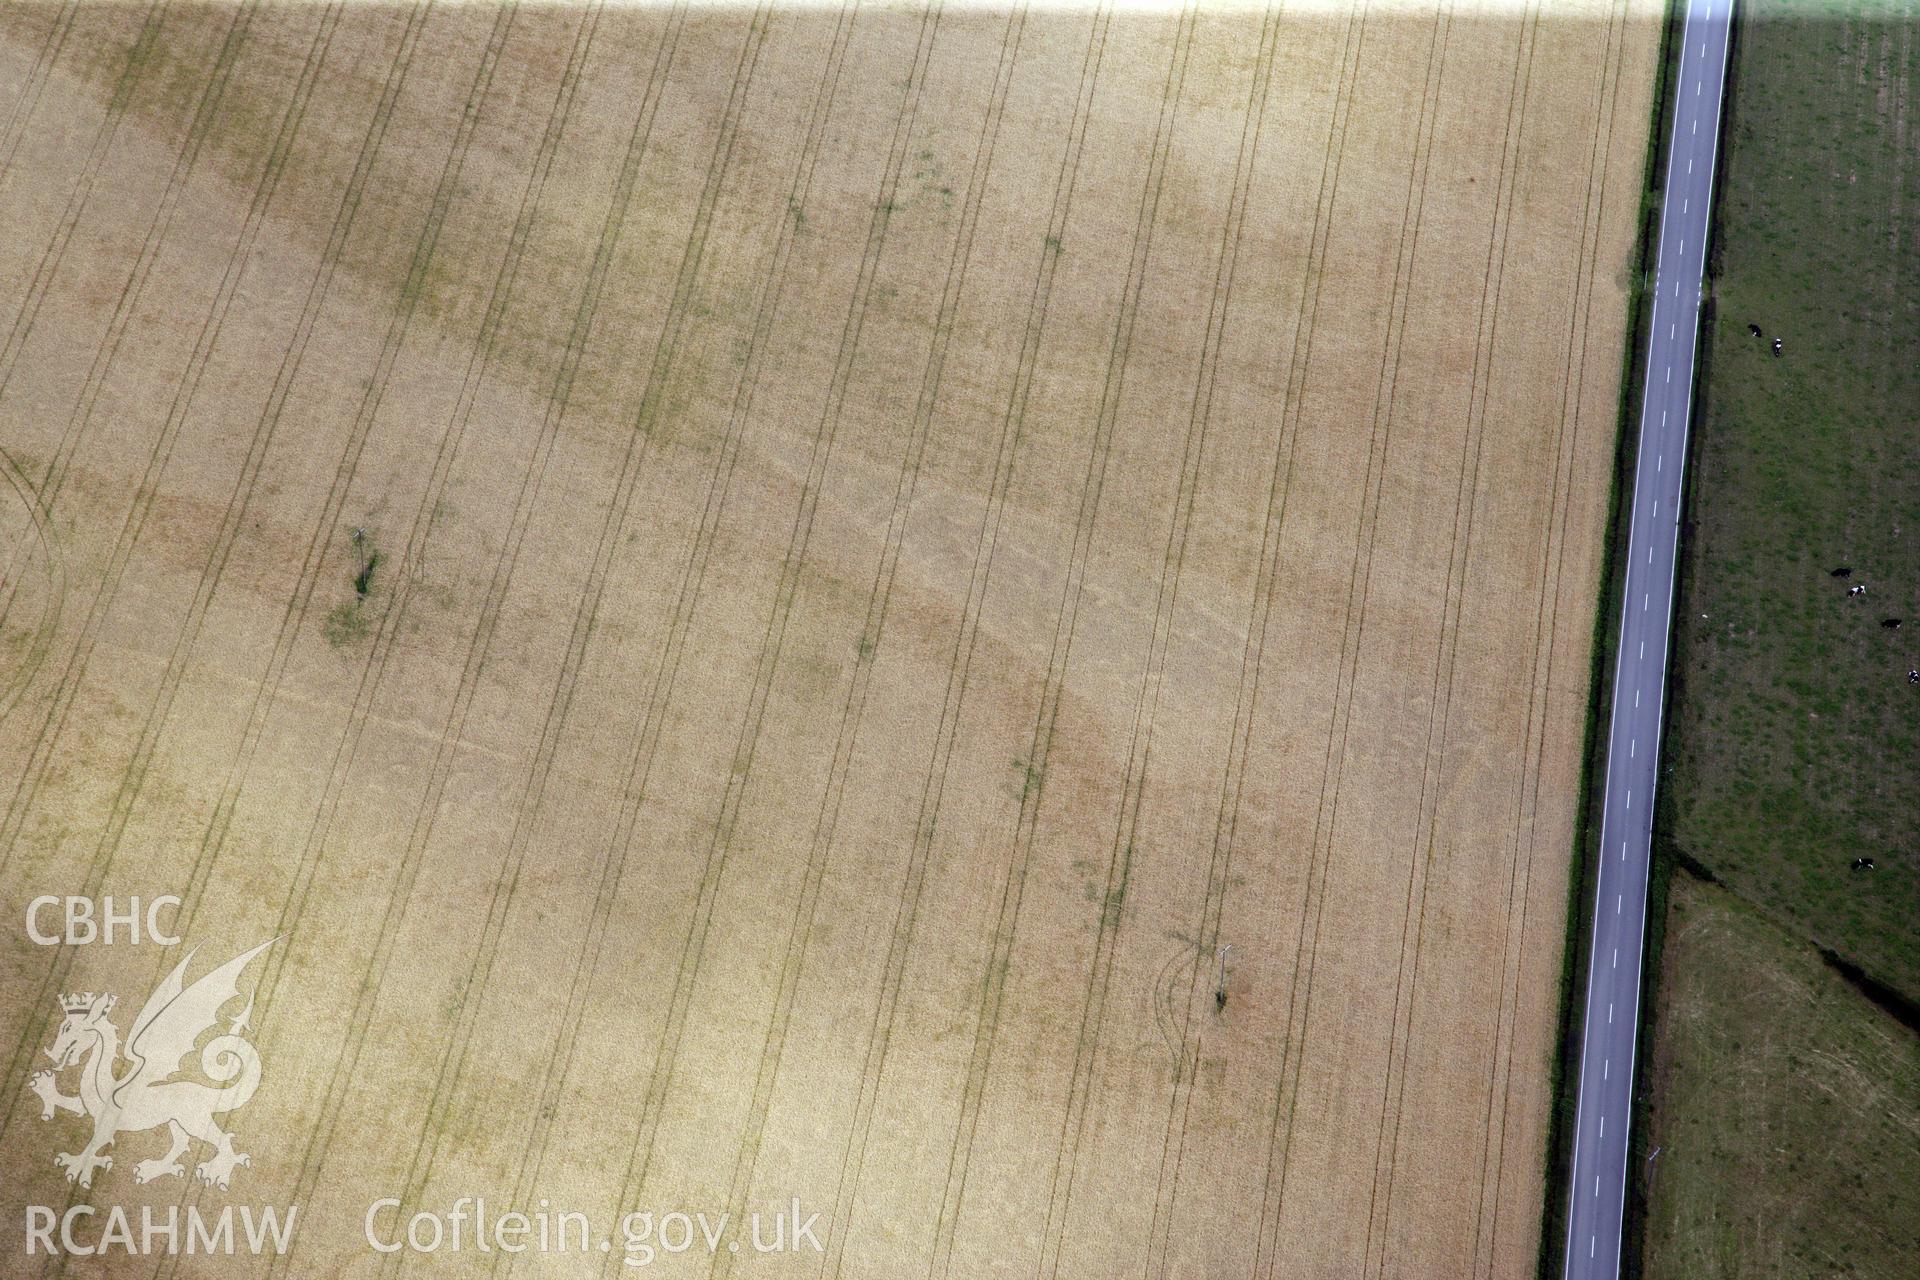 RCAHMW colour oblique photograph of Gerwyn-Fechan round barrow and other cropmarks. Taken by Toby Driver and Oliver Davies on 05/07/2011.